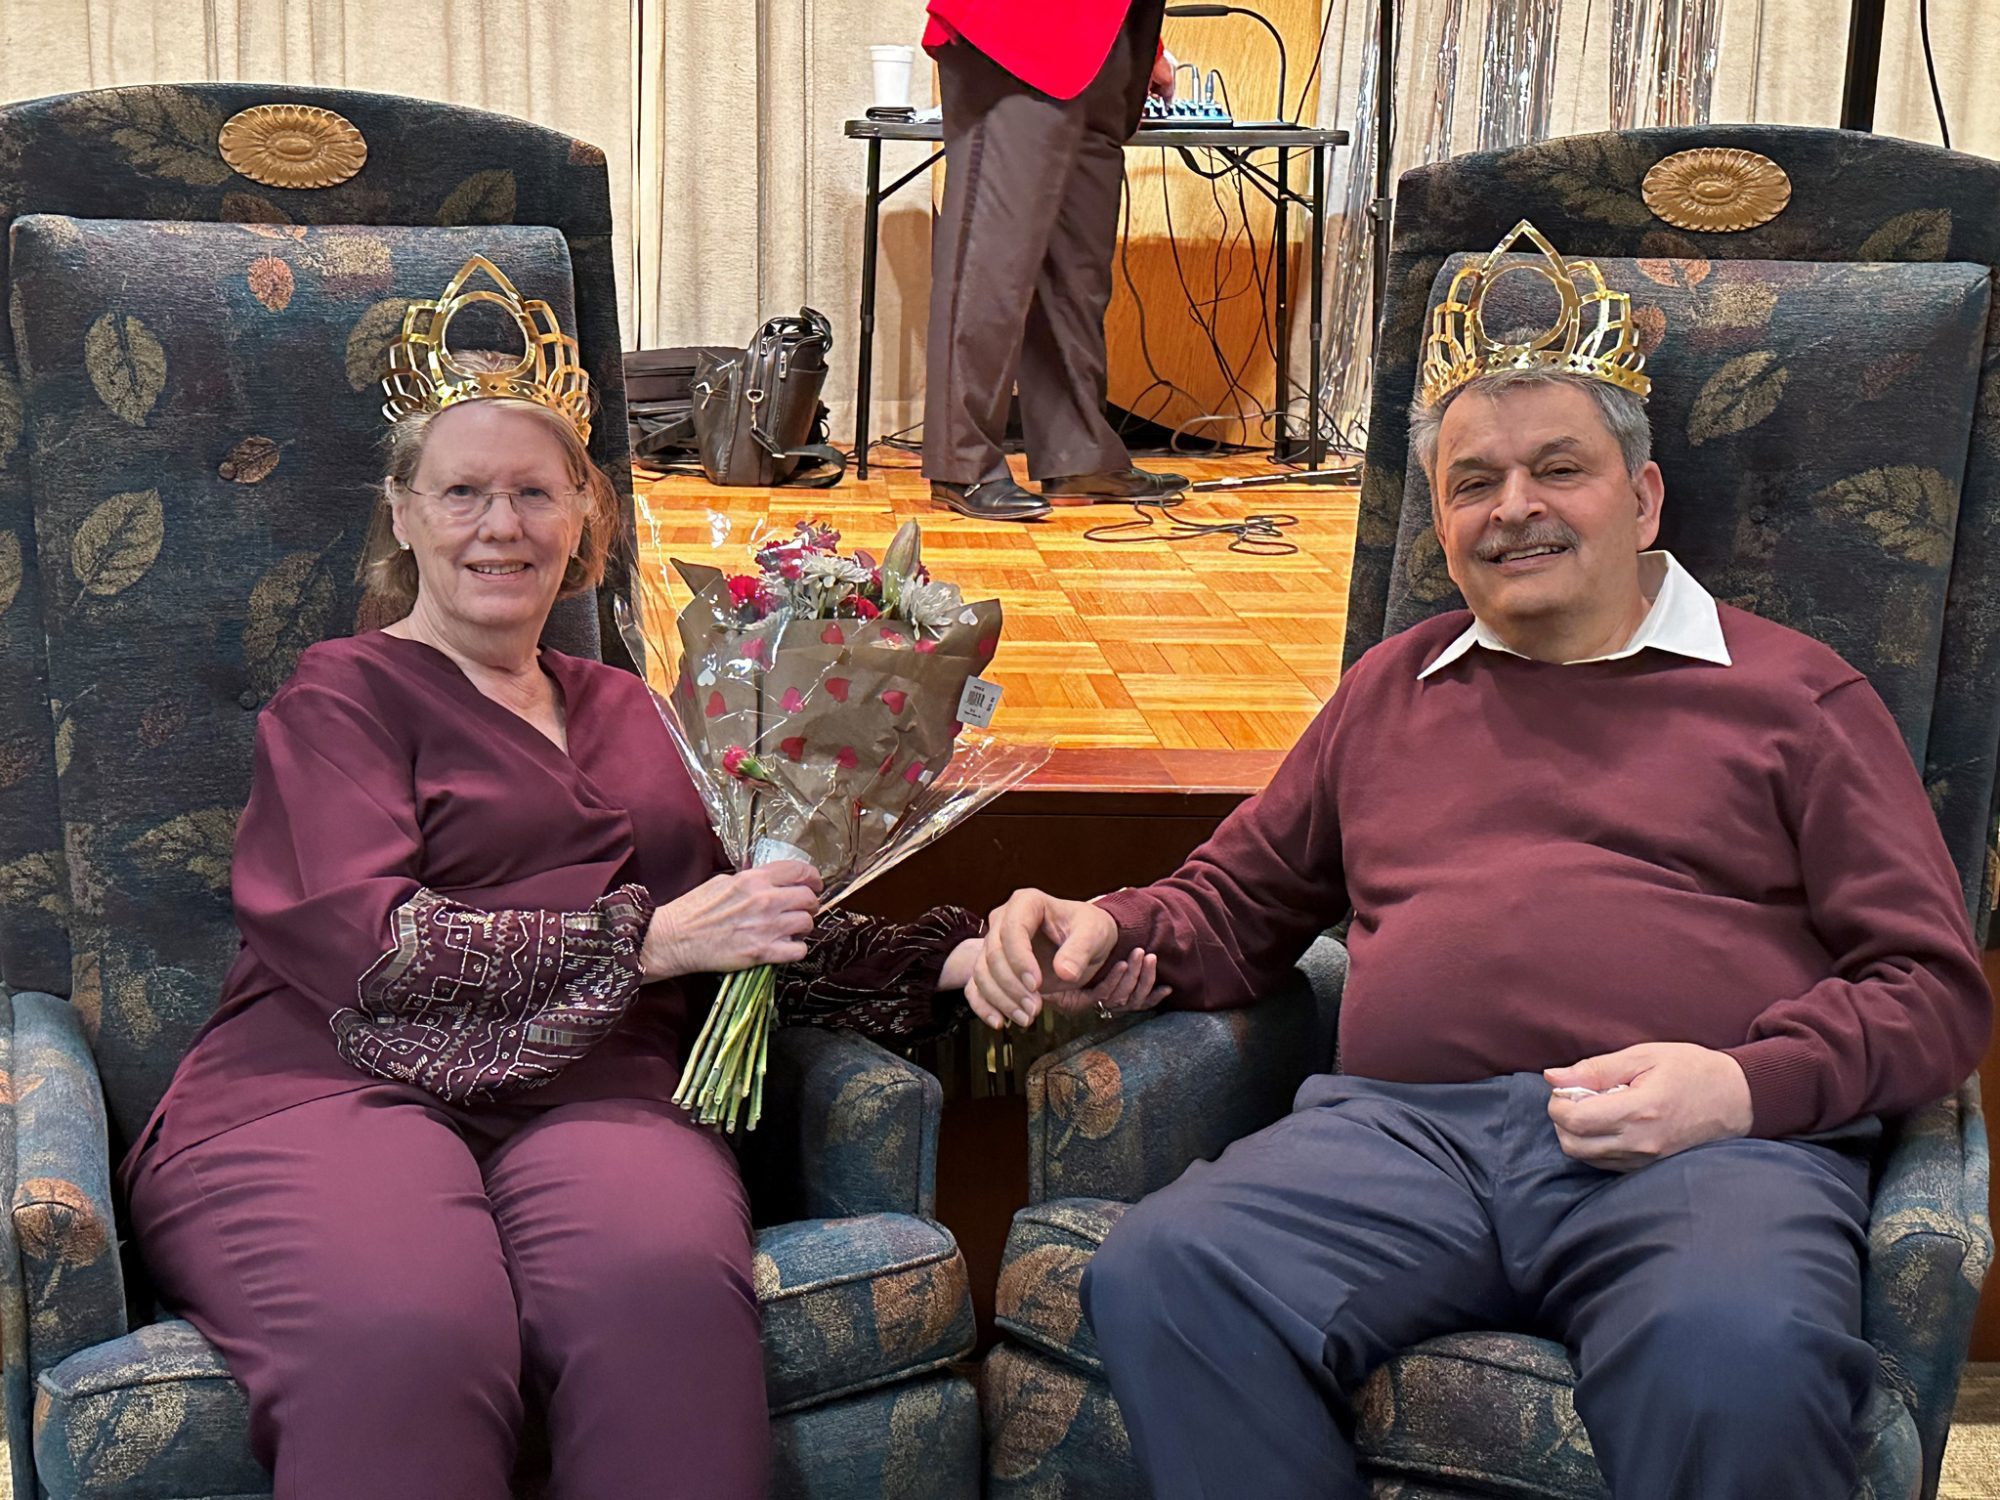 Senior Prom Queen and King, Barbara and Mike Mohajery